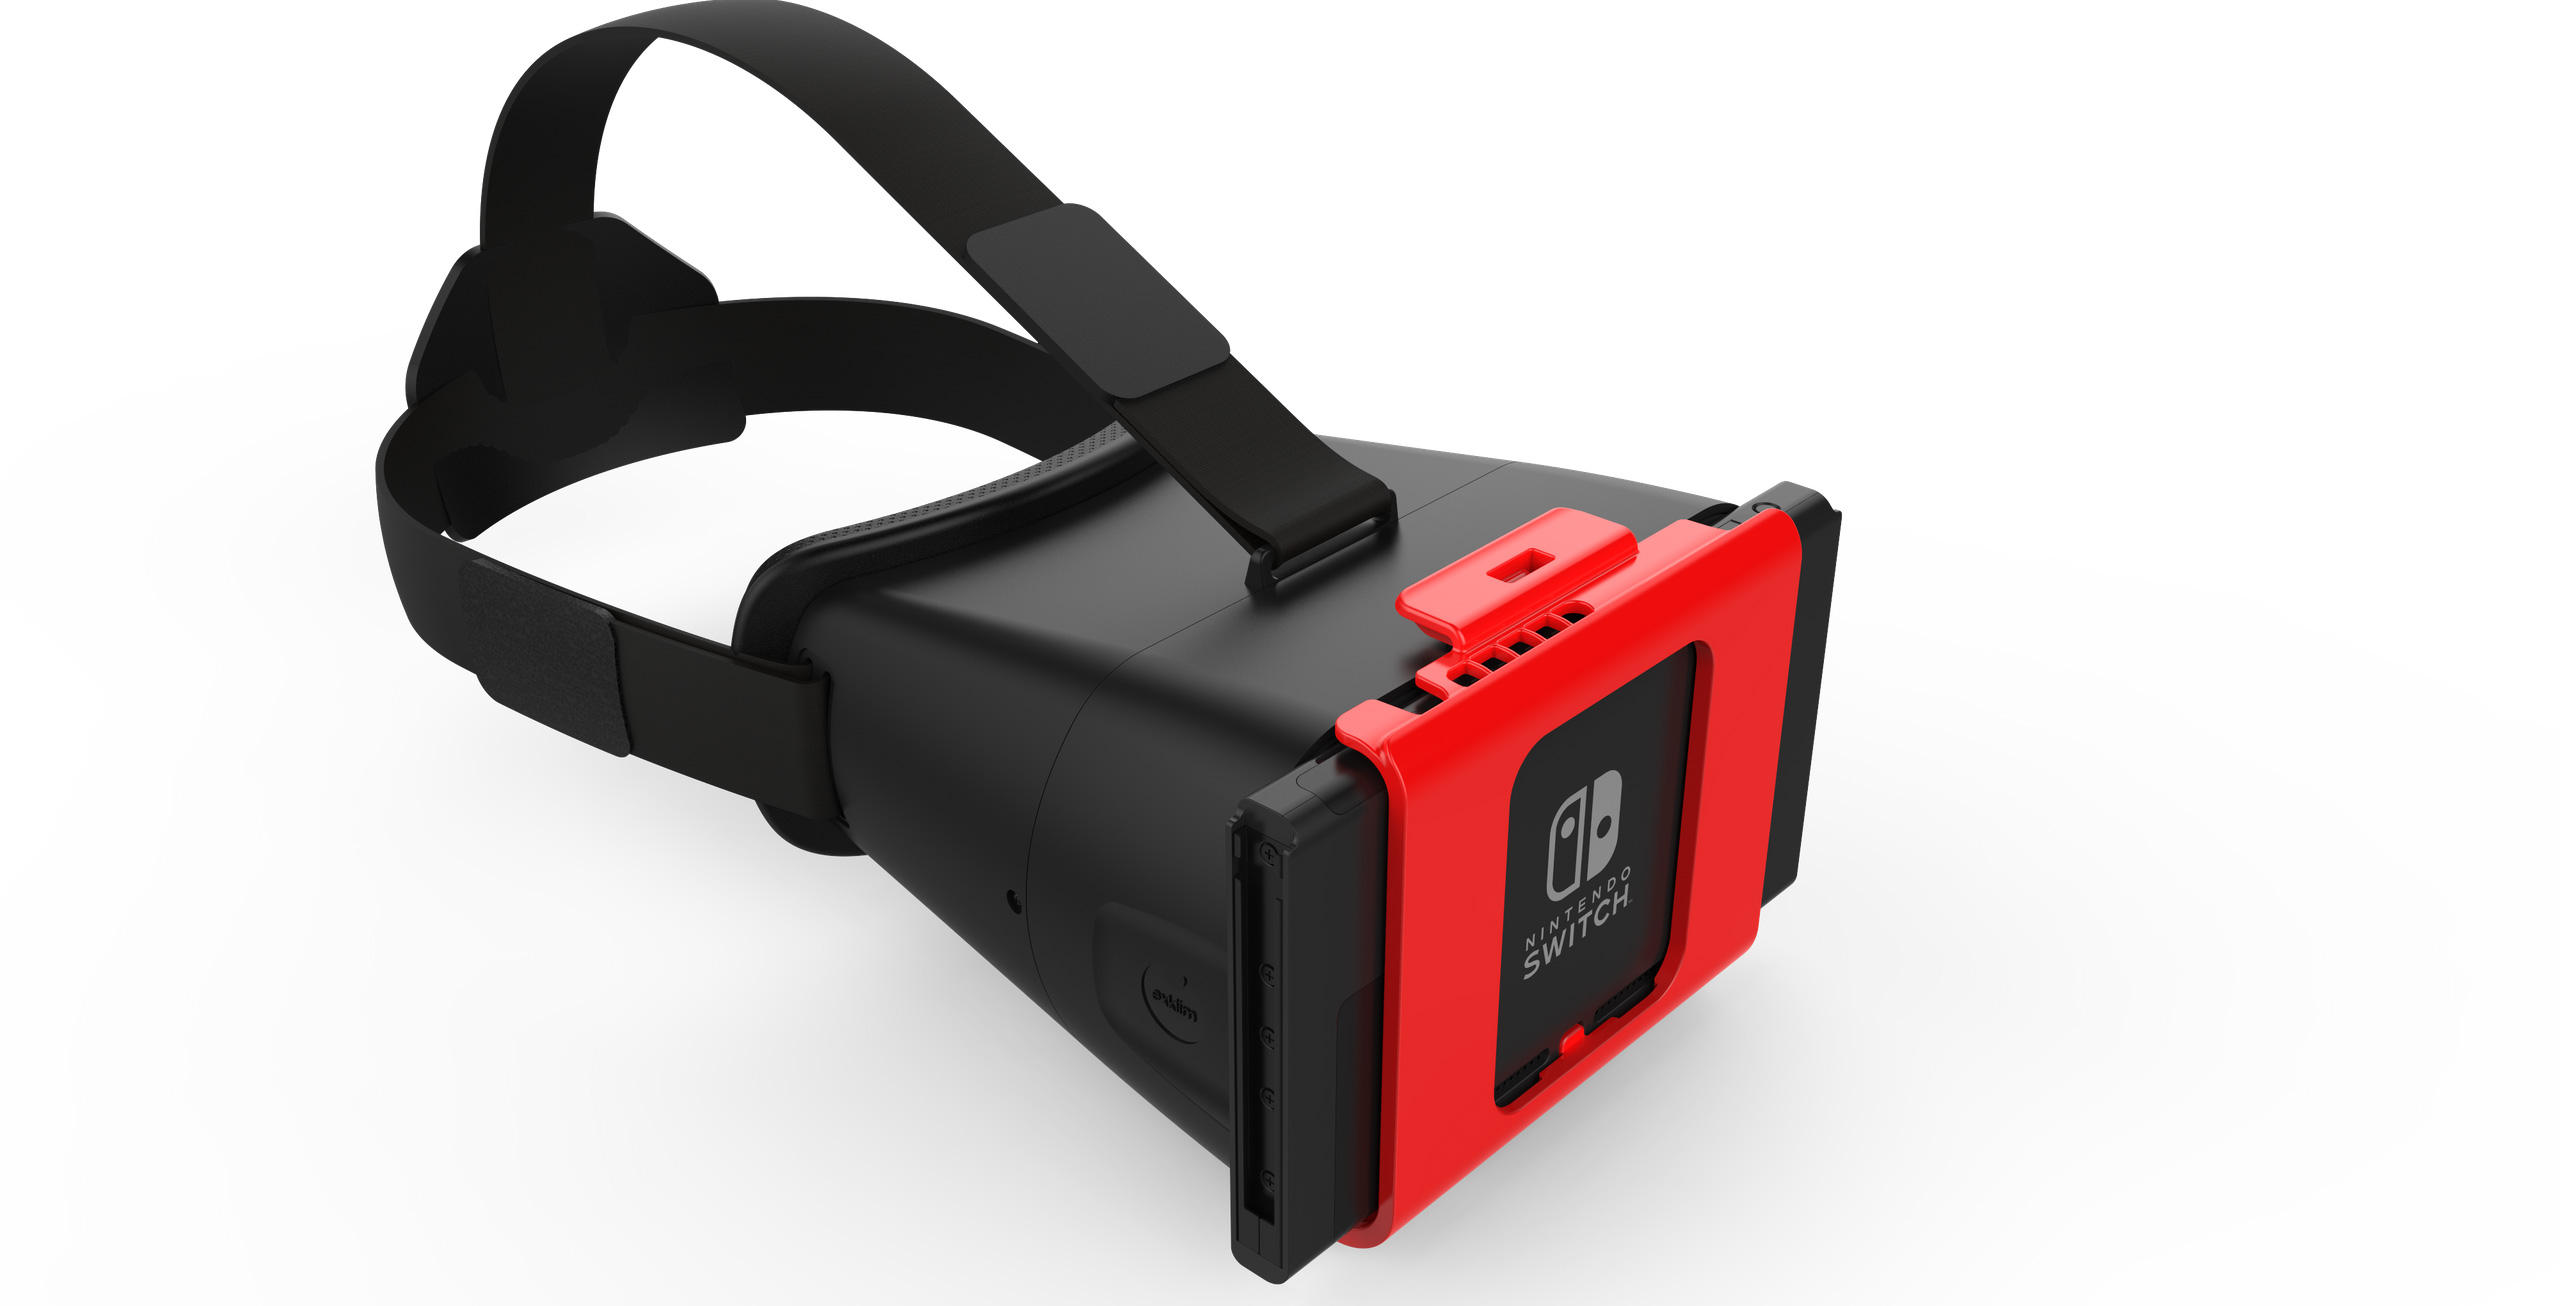 virtual headset for nintendo switch